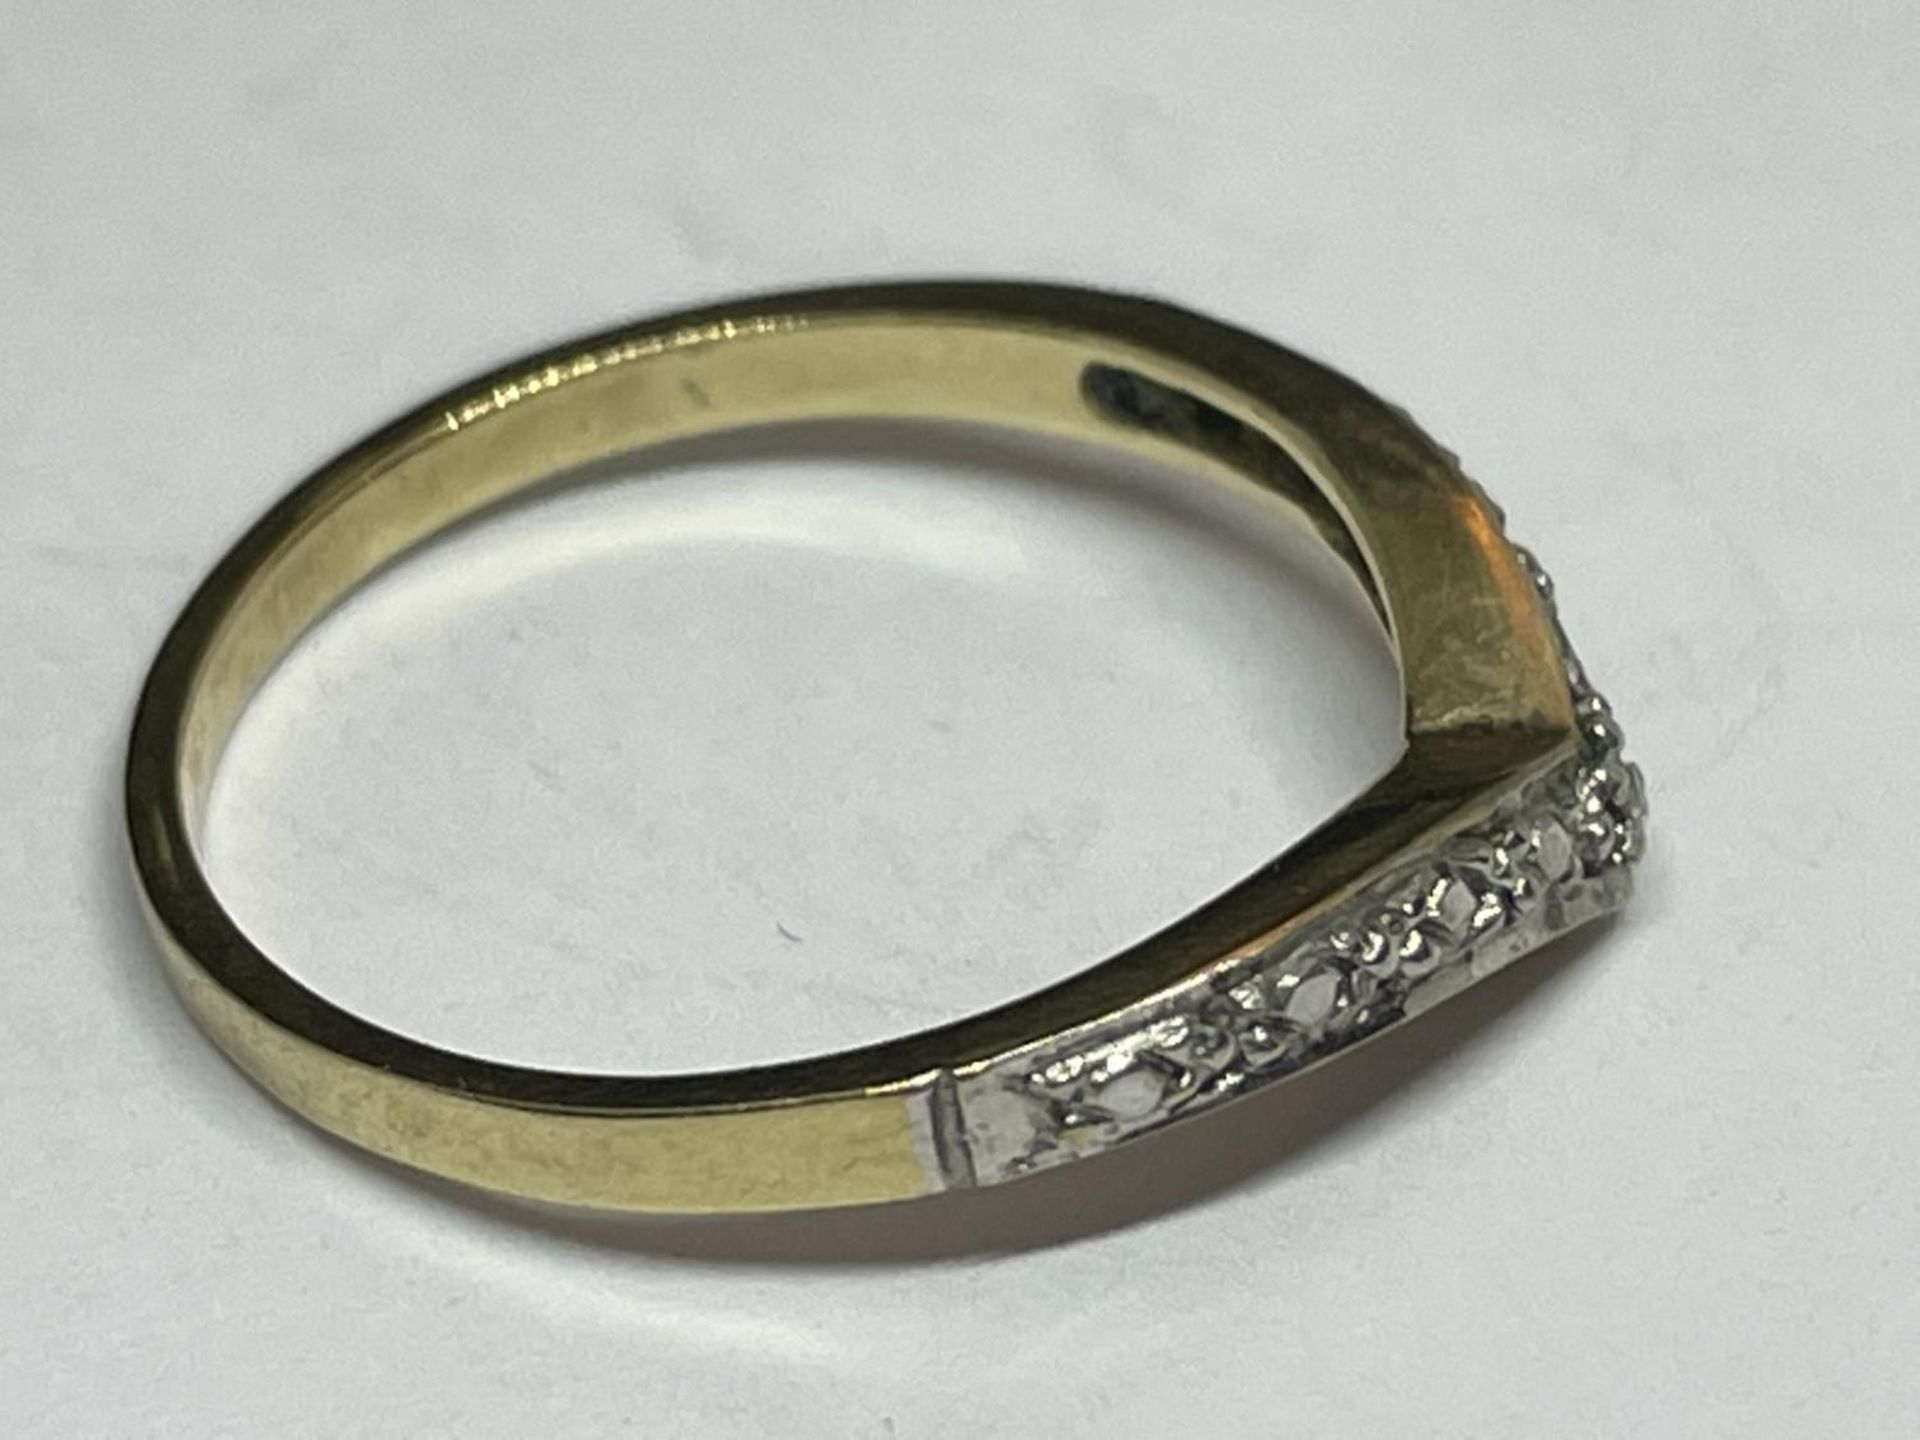 A 9 CARAT GOLD RING WITH DIAMONDS IN A WISHBONE DESIGN SIZE K - Image 4 of 4